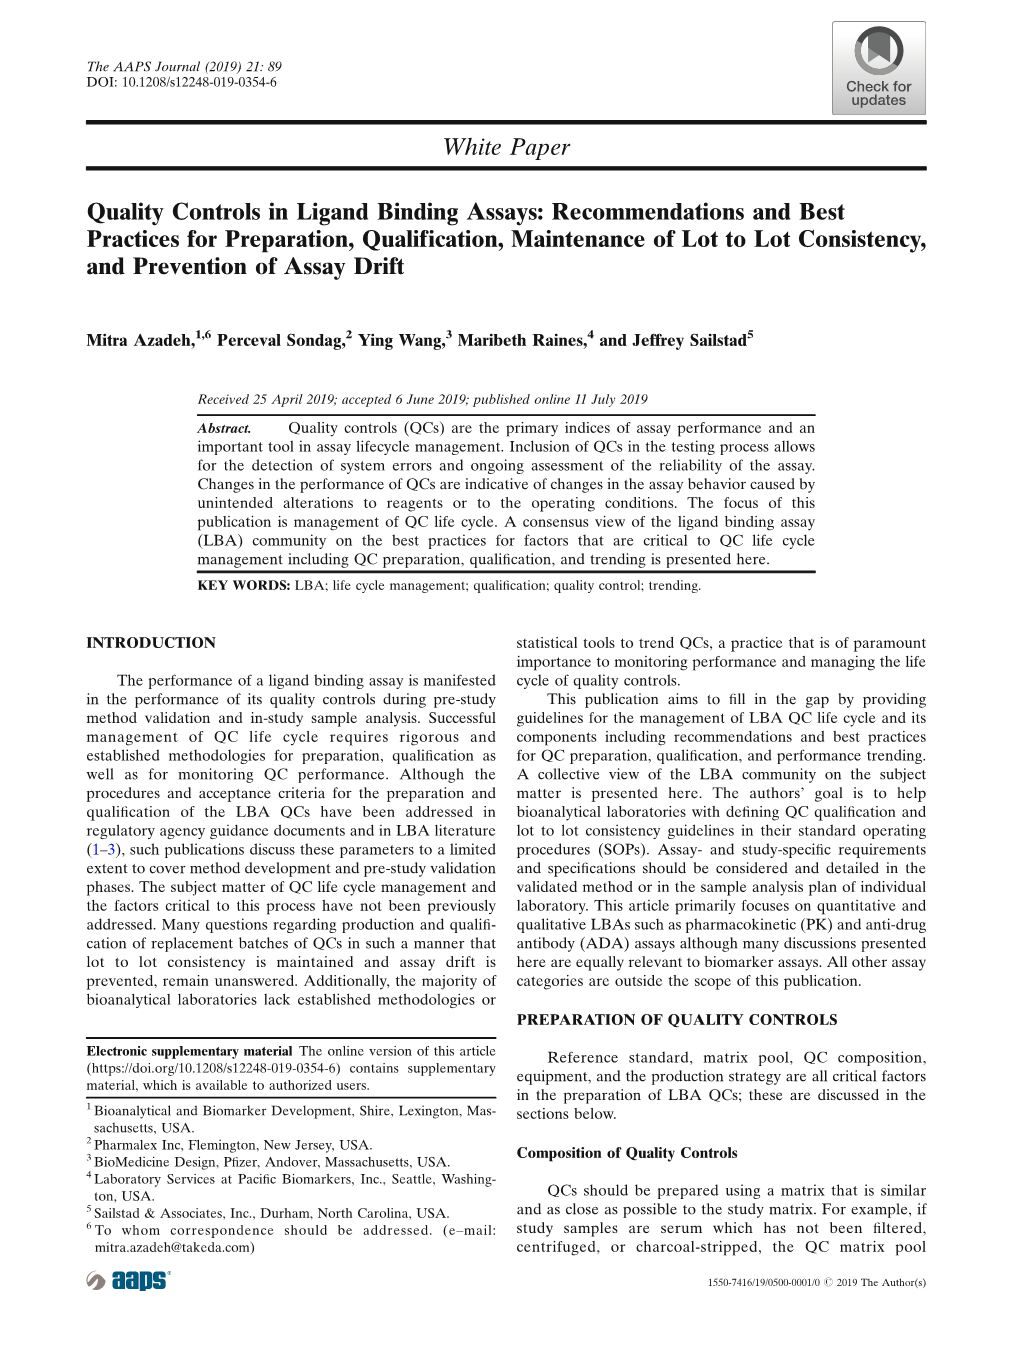 Quality Controls in Ligand Binding Assays: Recommendations And